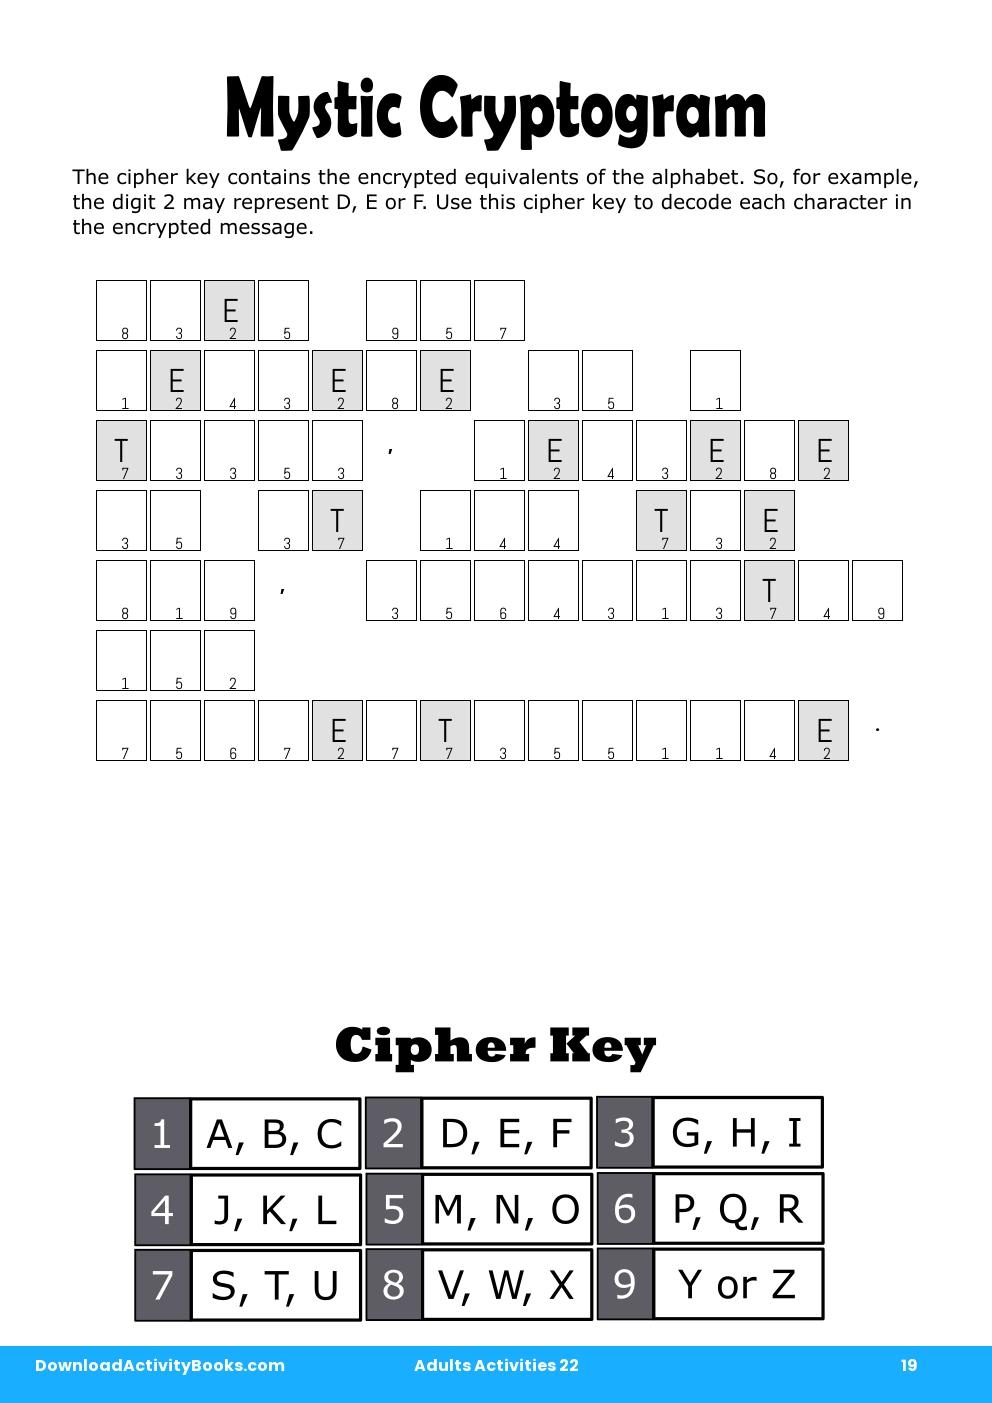 Mystic Cryptogram in Adults Activities 22